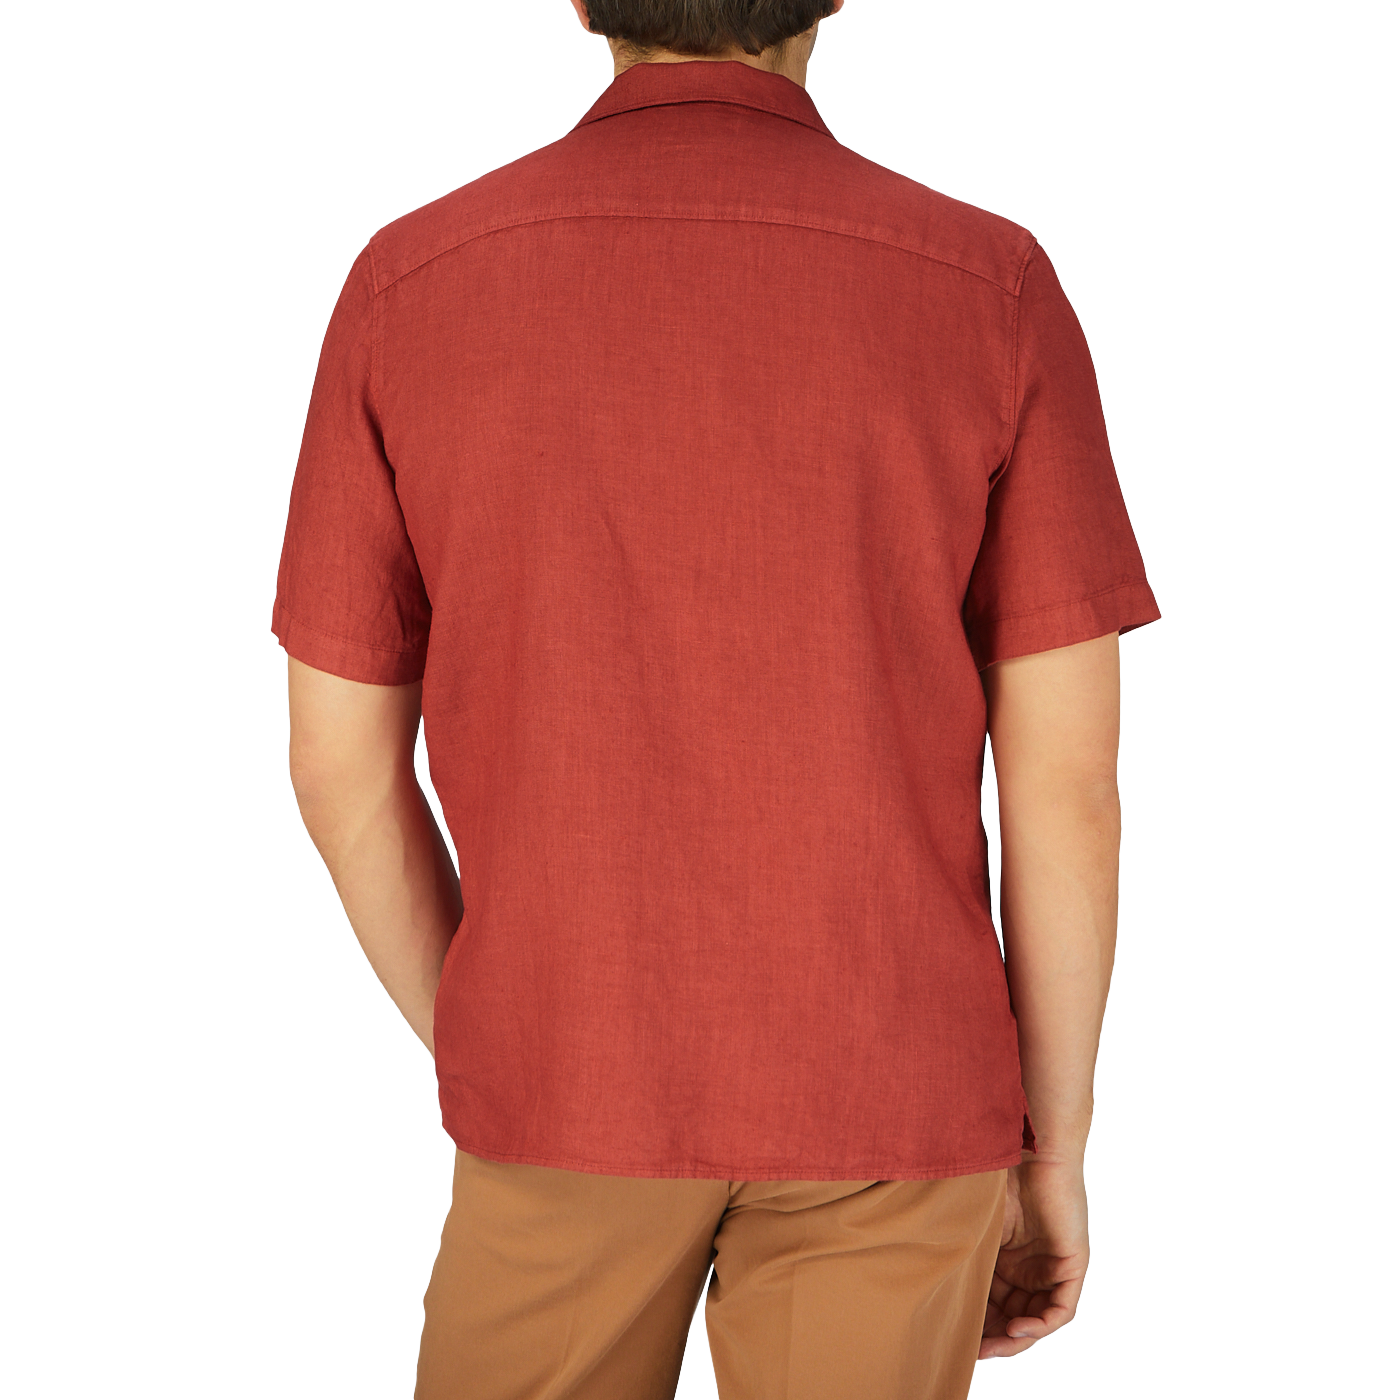 The back view of a man wearing a Brick Red Renato Linen Camp Collar Shirt by Tela Genova.